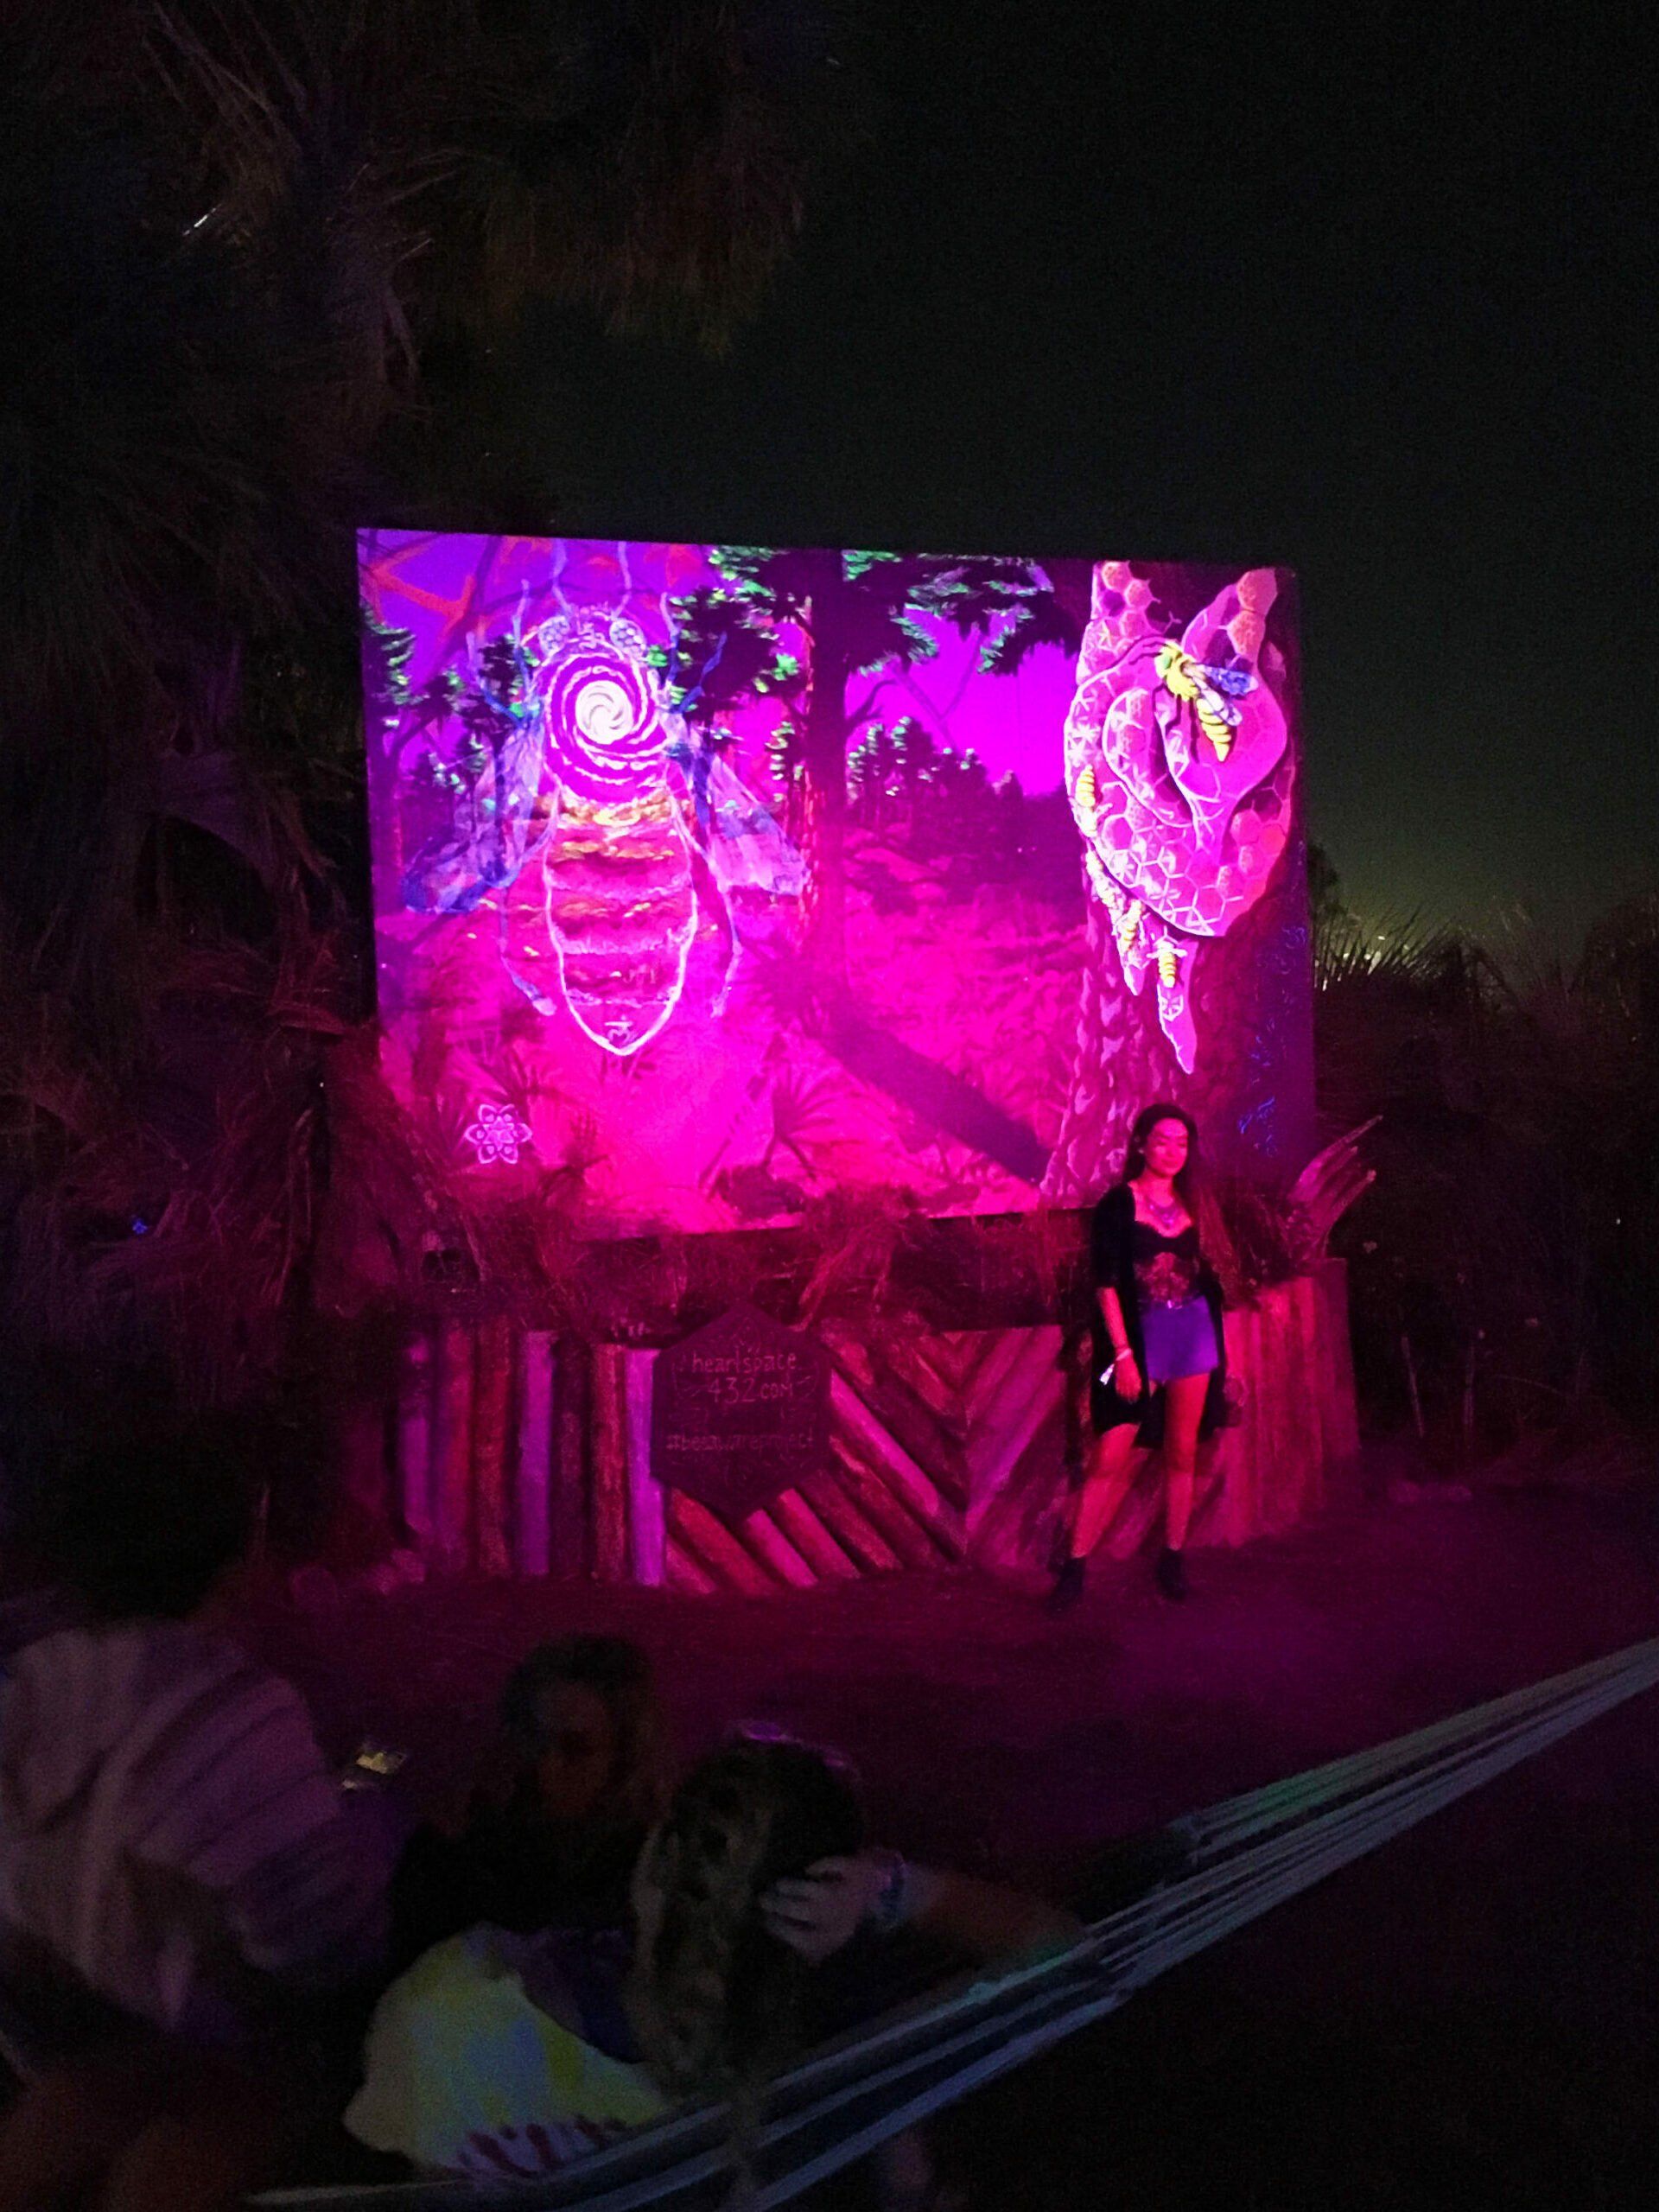 This image is the Bee Aware mural under pink lights. The lights reveal elements hidden in the painting under normal lighting. This Mural was installed at the Okeechobee music festival.